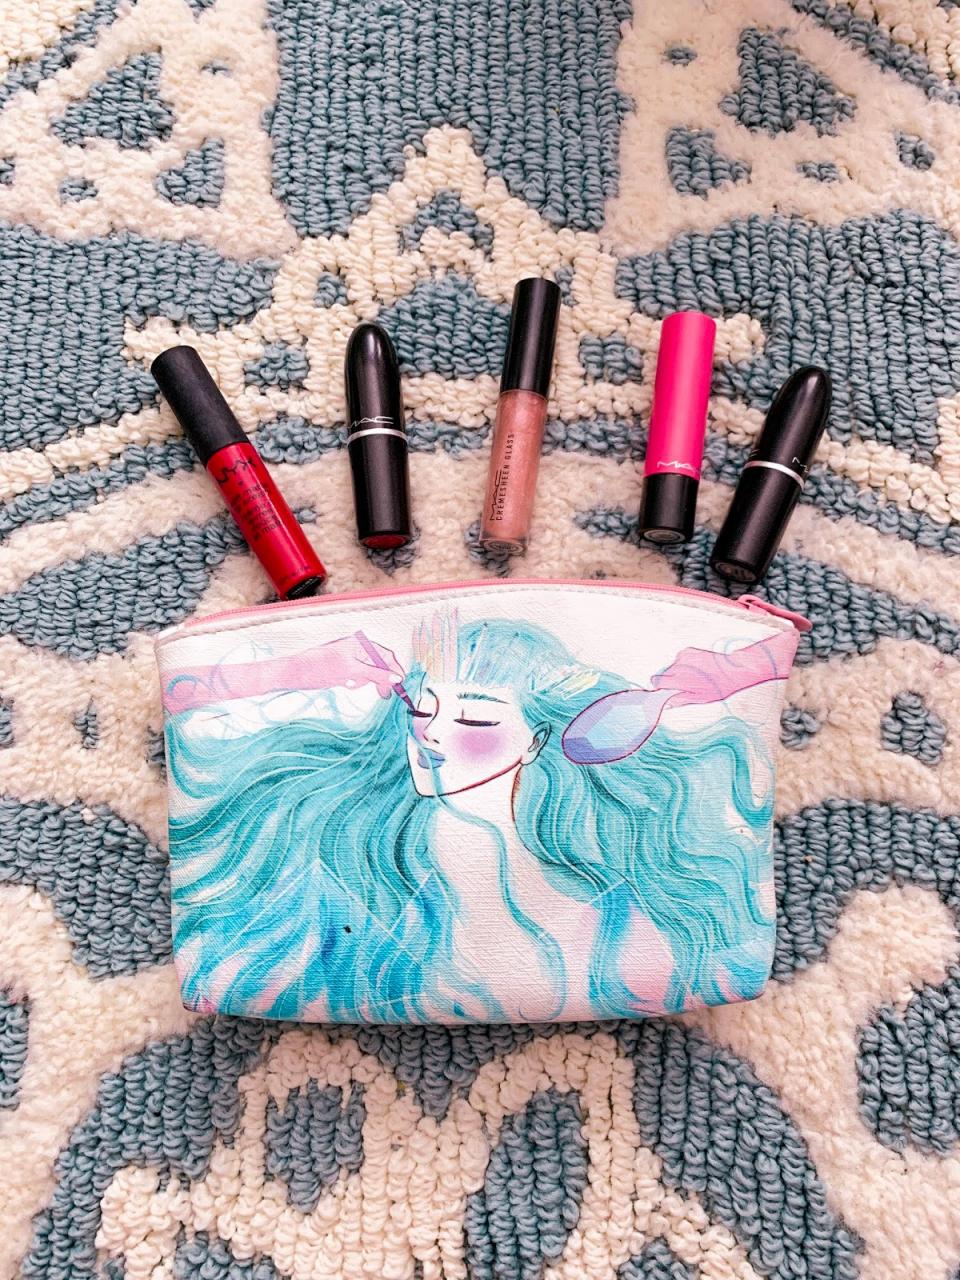 I brought my ipsy bag to store some of my favorite lip colors